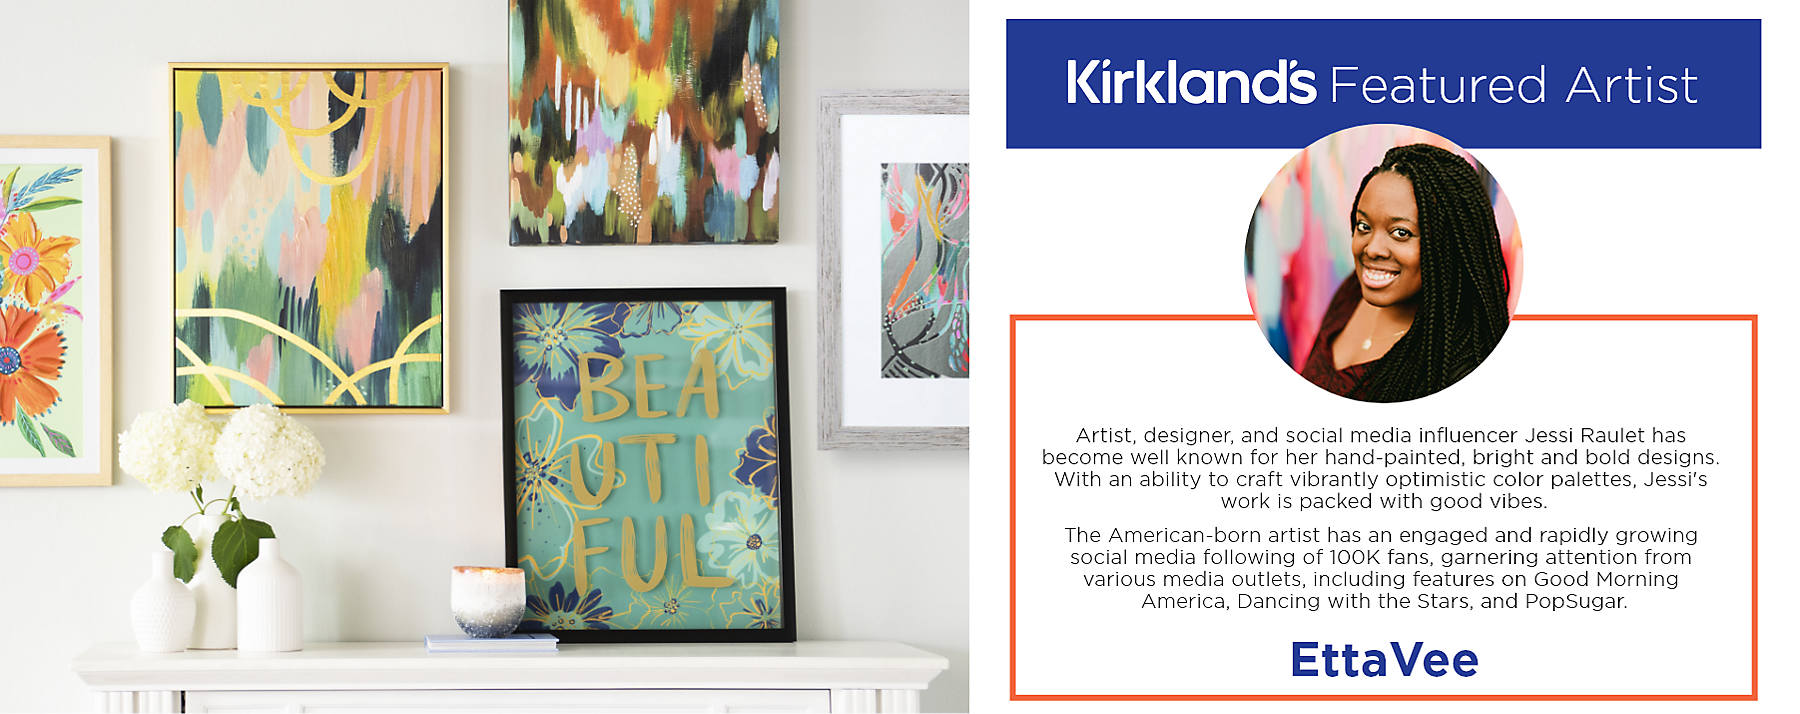 Kirkland's Featured Artist EttaVee Artist, designer, and social media influencer Jessi Raulet has become well known for her hand-painted, bright and bold designs. With an ability to craft vibrantly optimistic color palettes, Jessi's work is packed with good vibes. The American-born artist has an engaged and rapidly growing social media following of 100K fans, garnering attention from various media outlets, including features on Good Morning America, Dancing with the Stars, and PopSugar.